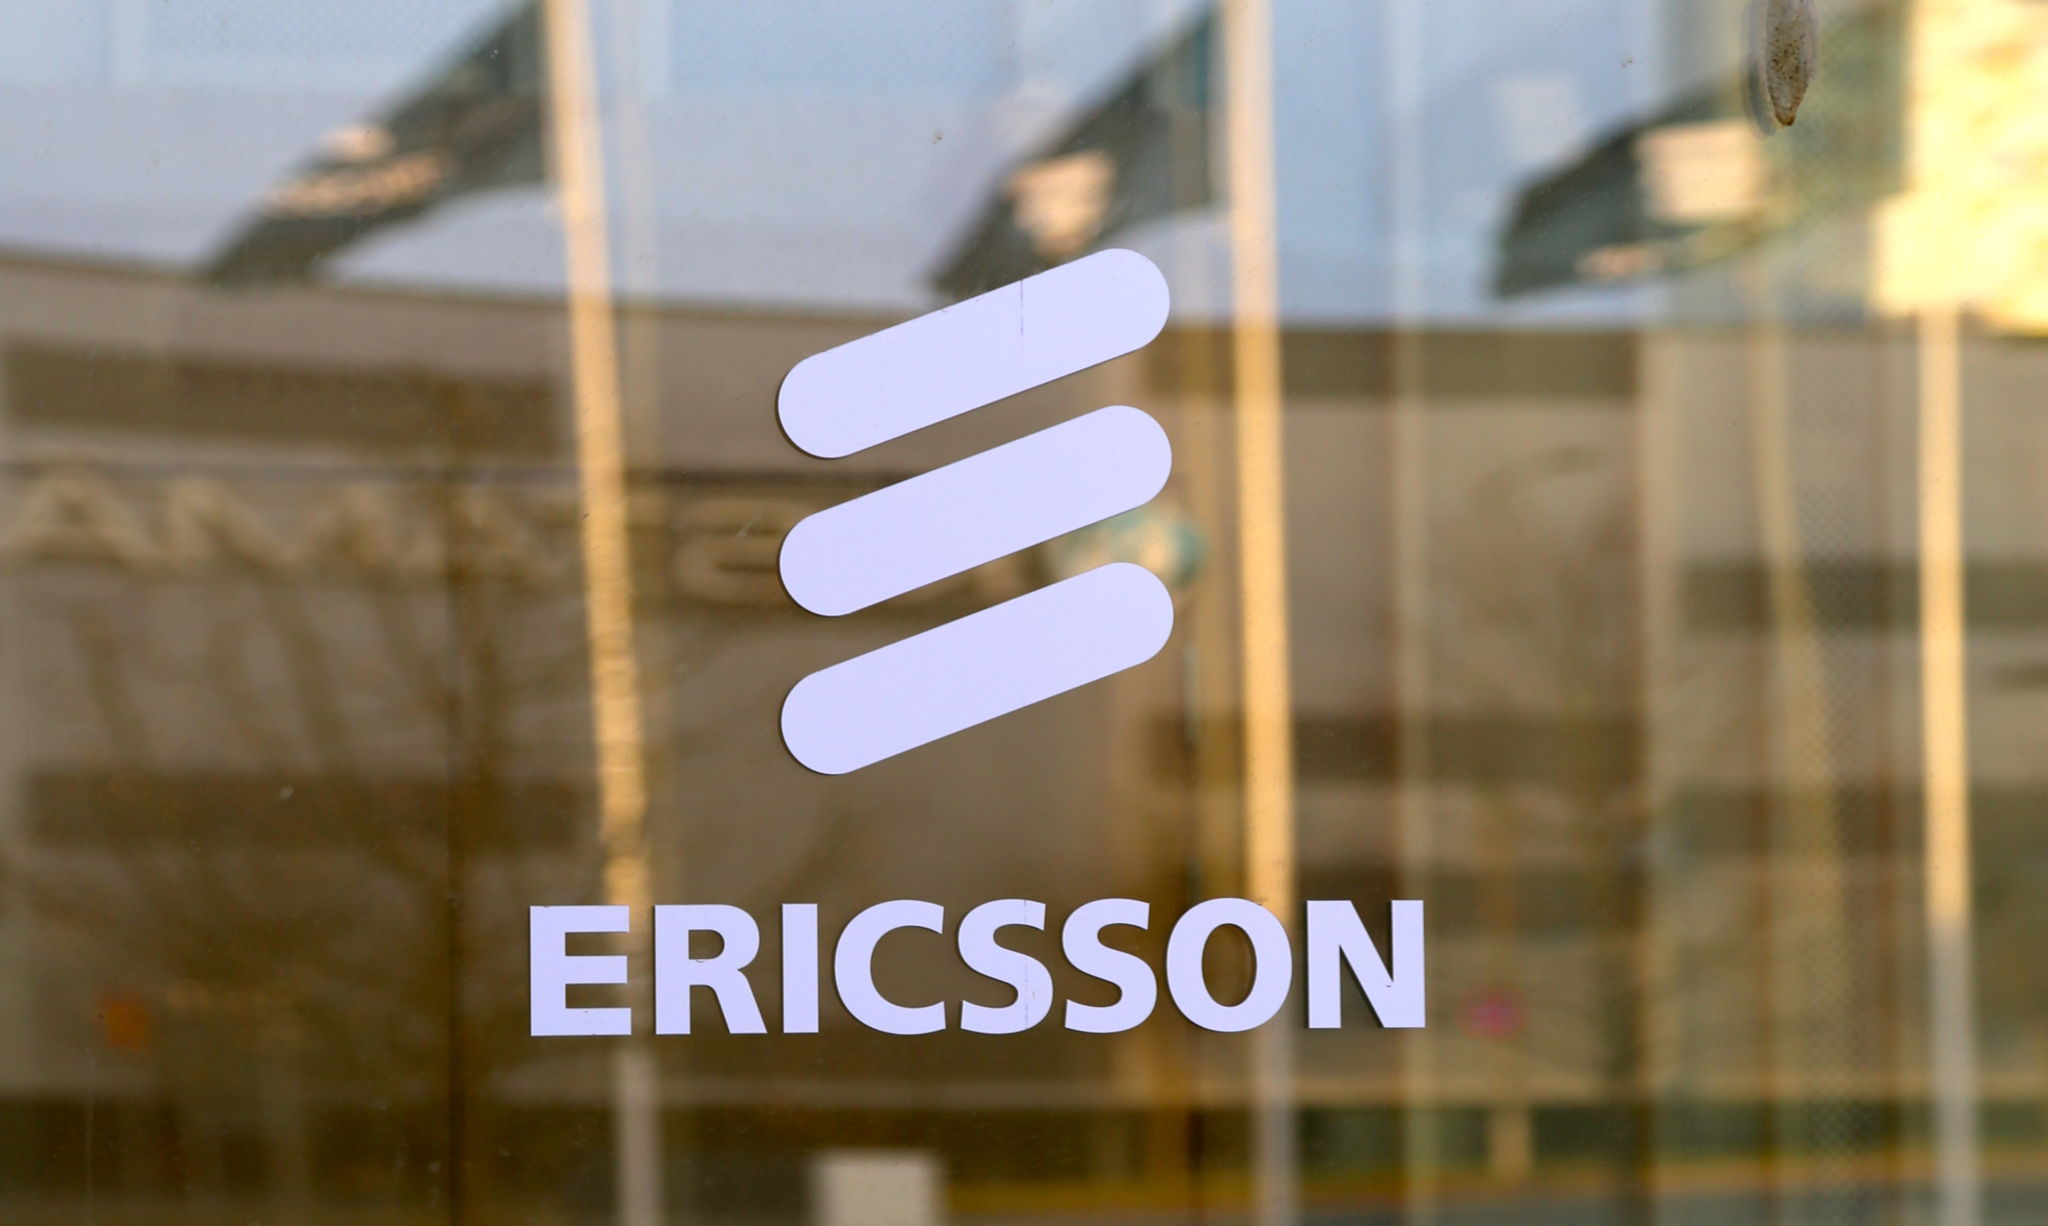 Ericsson report addresses transport and logistics disruptions with ZF and Orange Belgium to demonstrate the value of cellular IoT-connectivity